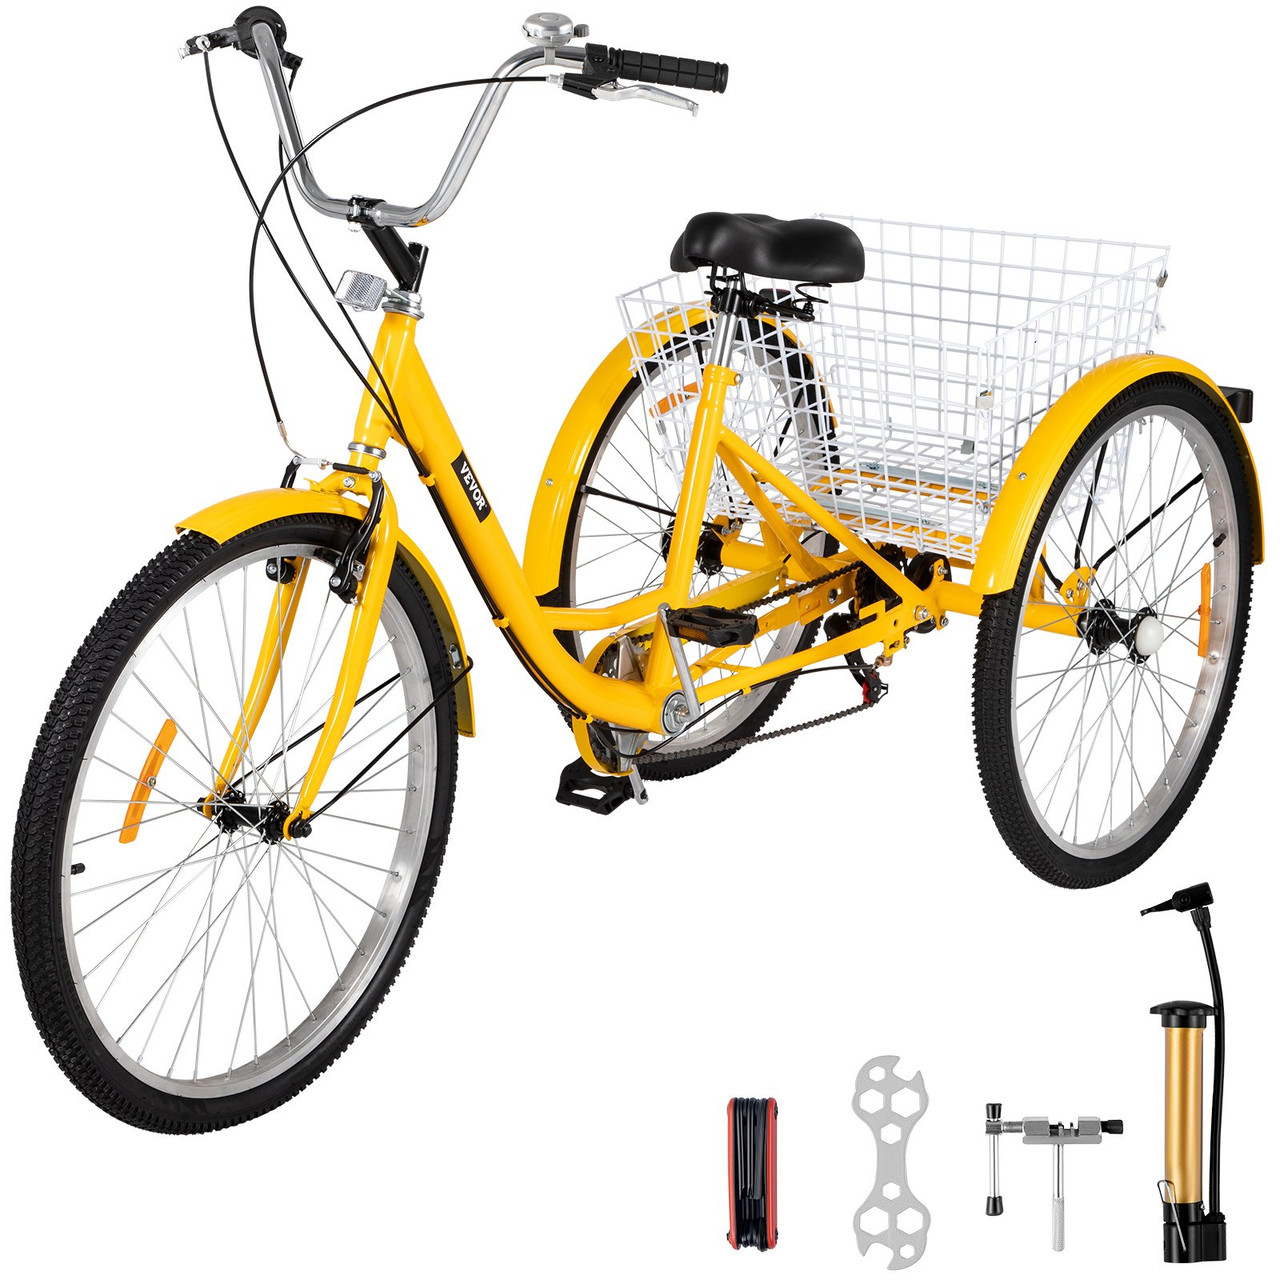 Adult Tricycle 7 Speed Cruise Bike 20 inch Adjustable Trike with Bell Brake System Cruiser Bicycles Large Size Basket for Exercise (Yellow 20 7Speed)